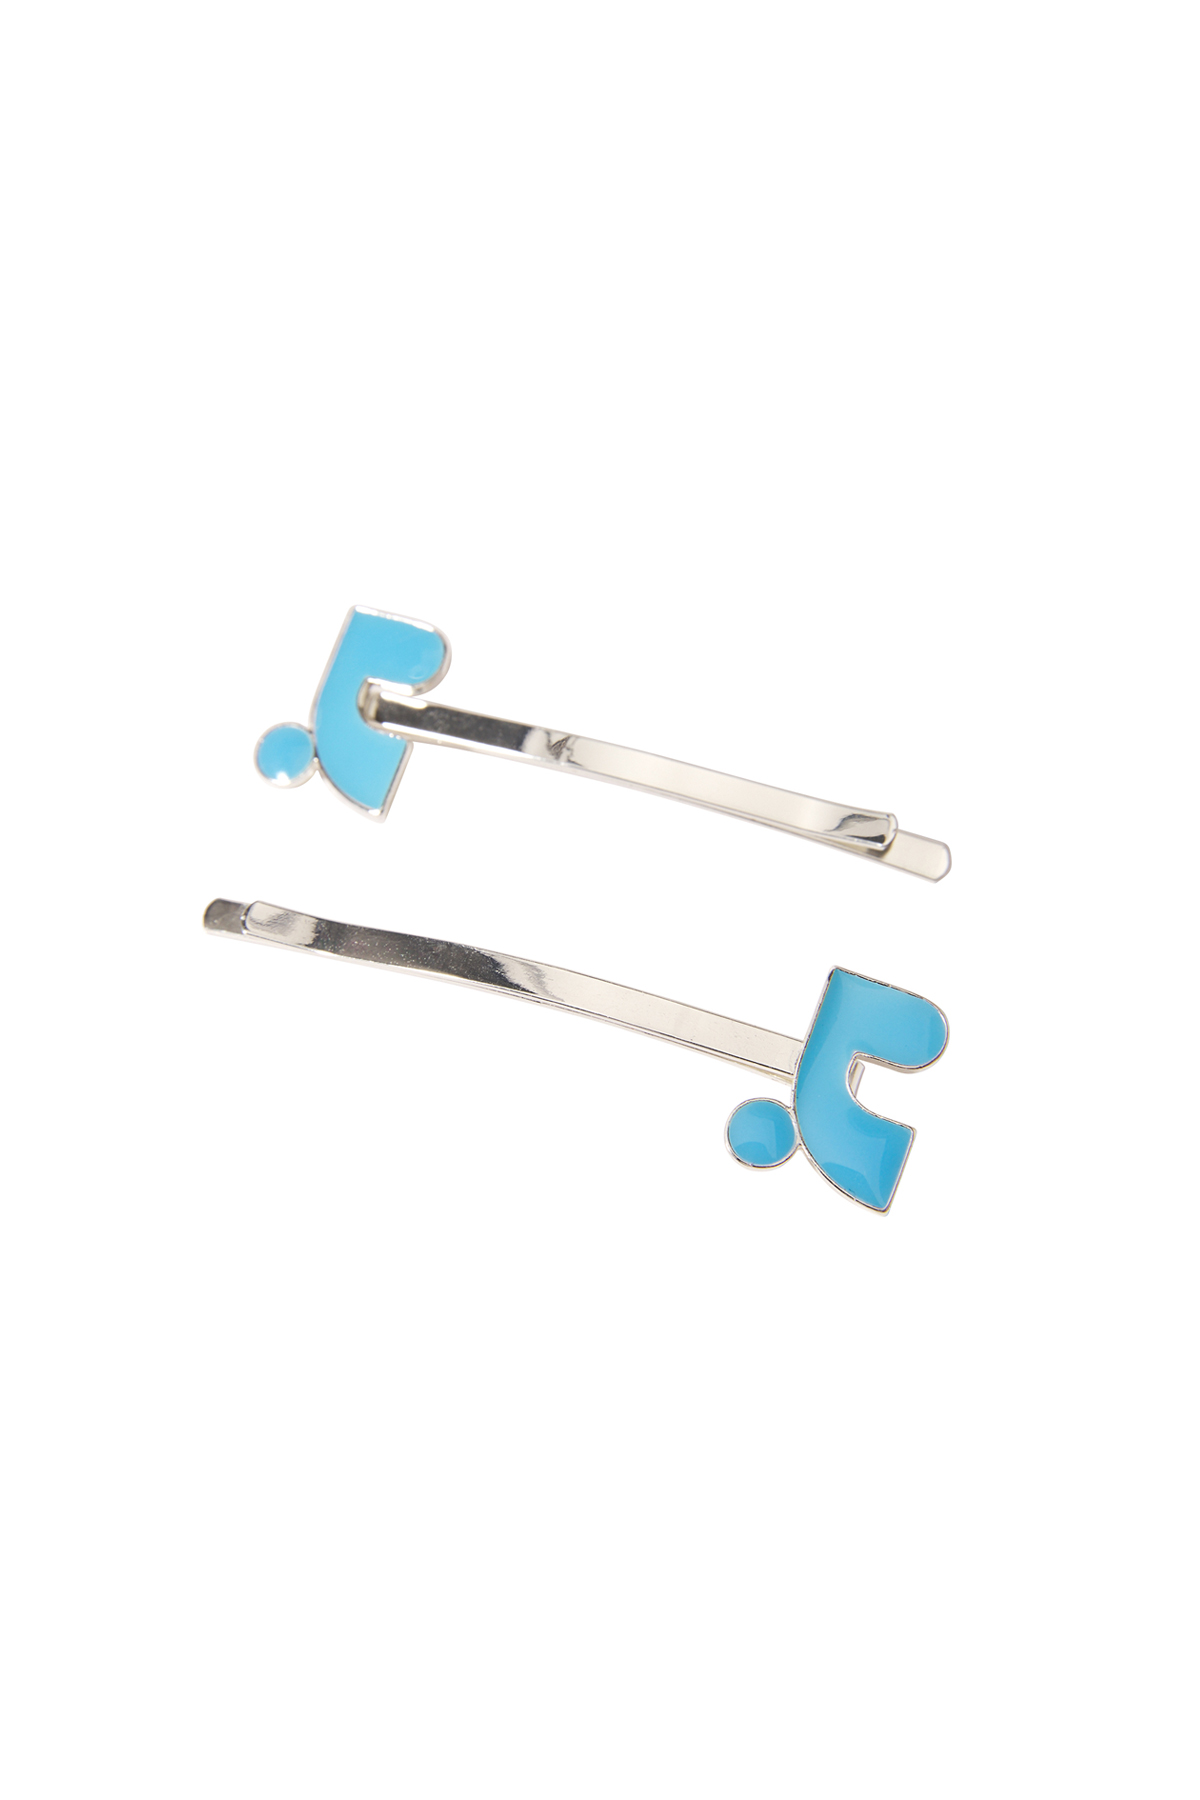 [EXCLUSIVE] RR METAL COLOR HAIR PIN - SKYBLUE